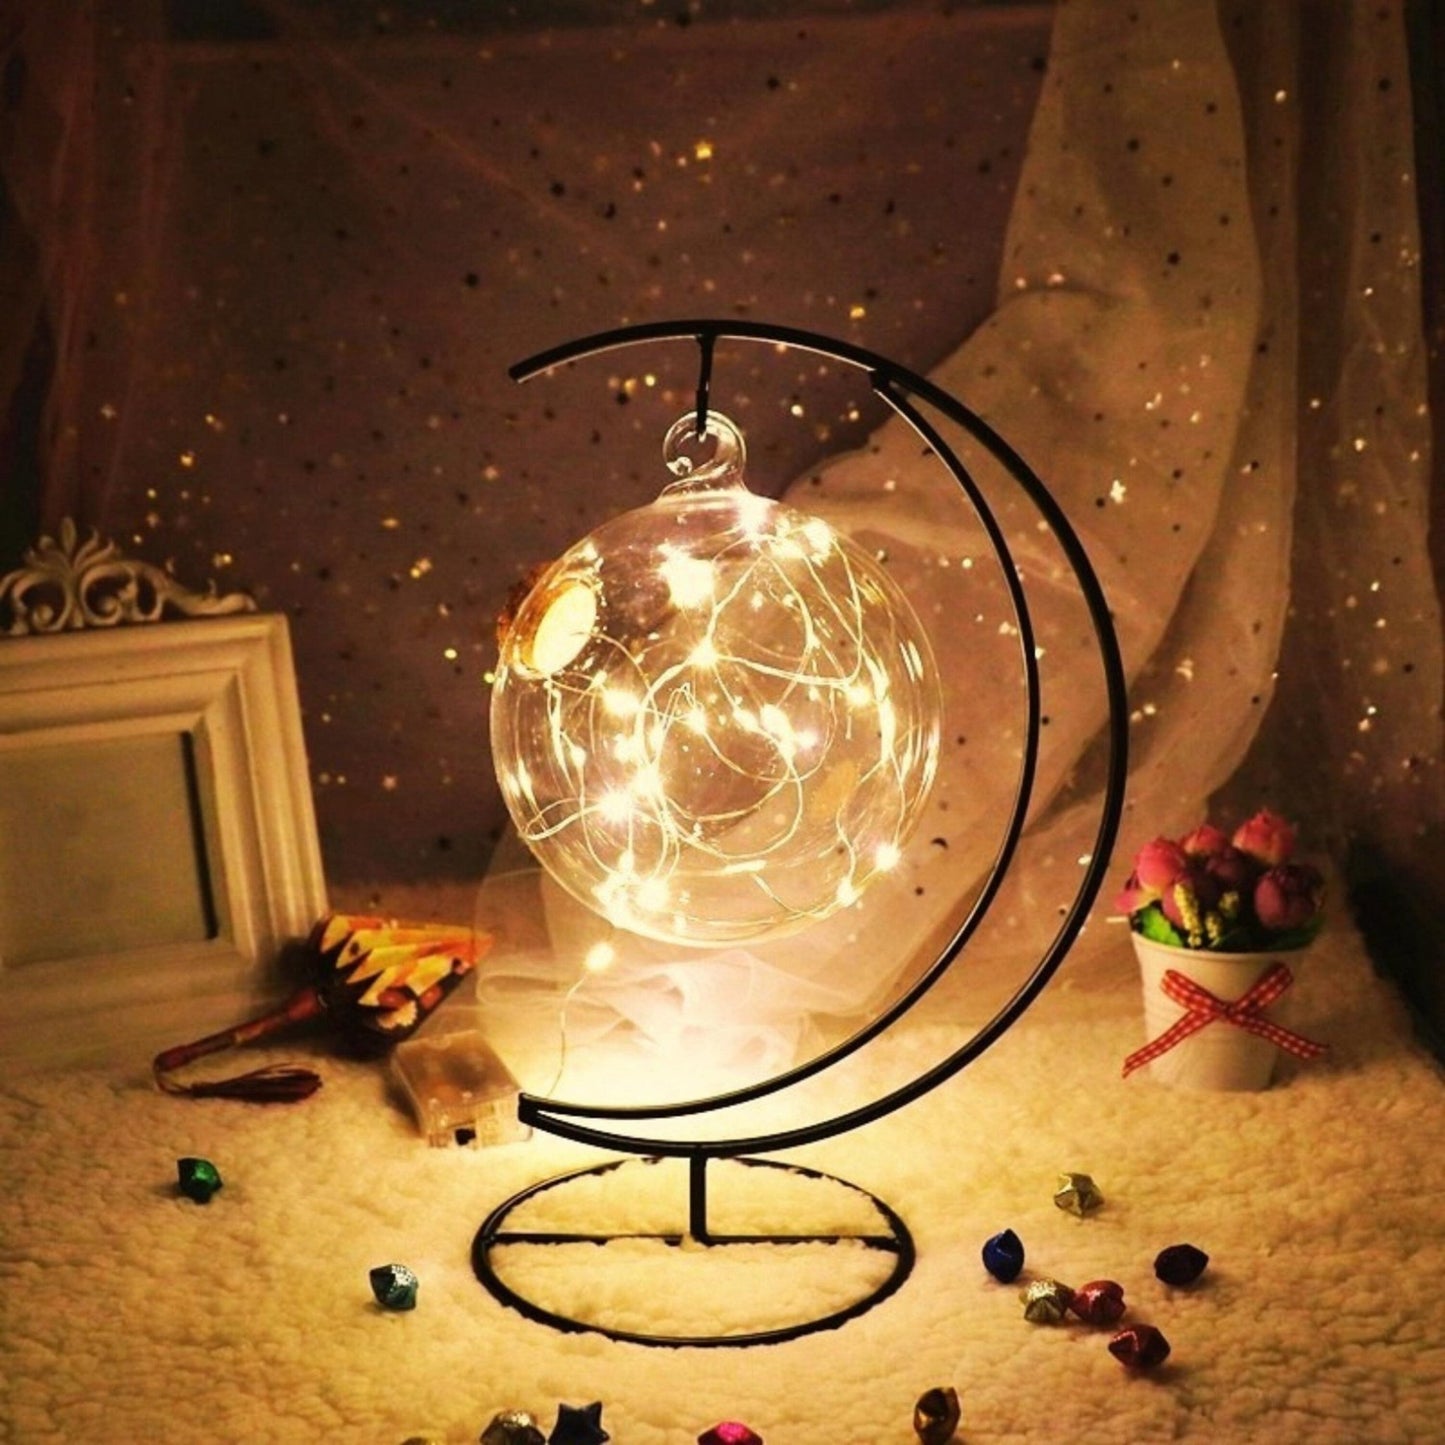 Festive Moon Lamp - Space Mesmerise - Space Gifts | Lamps | Statues | Home Decor